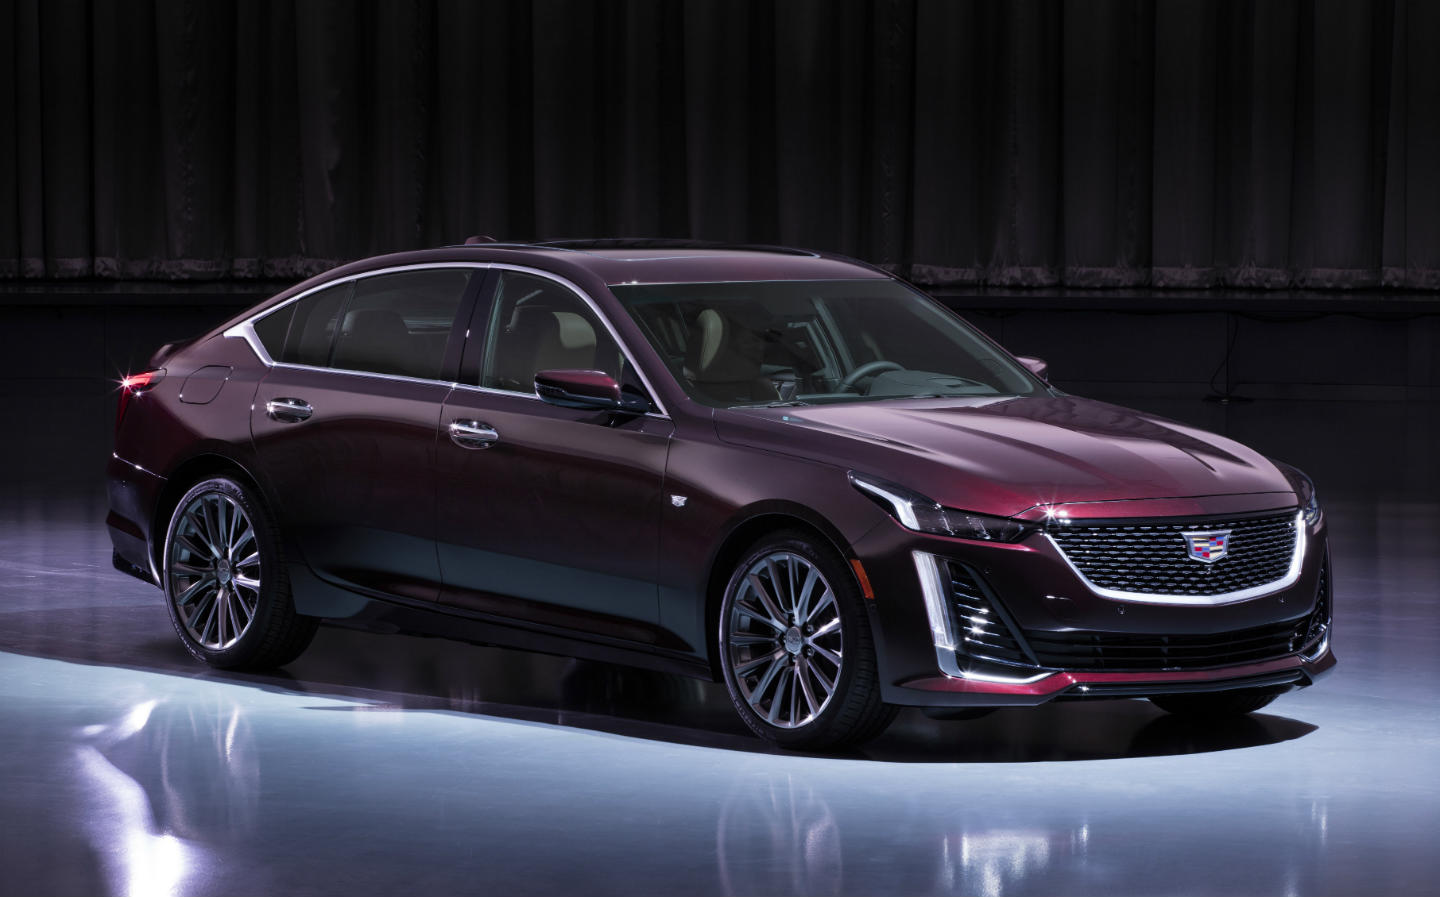 The star cars of the 2019 New York Motor Show